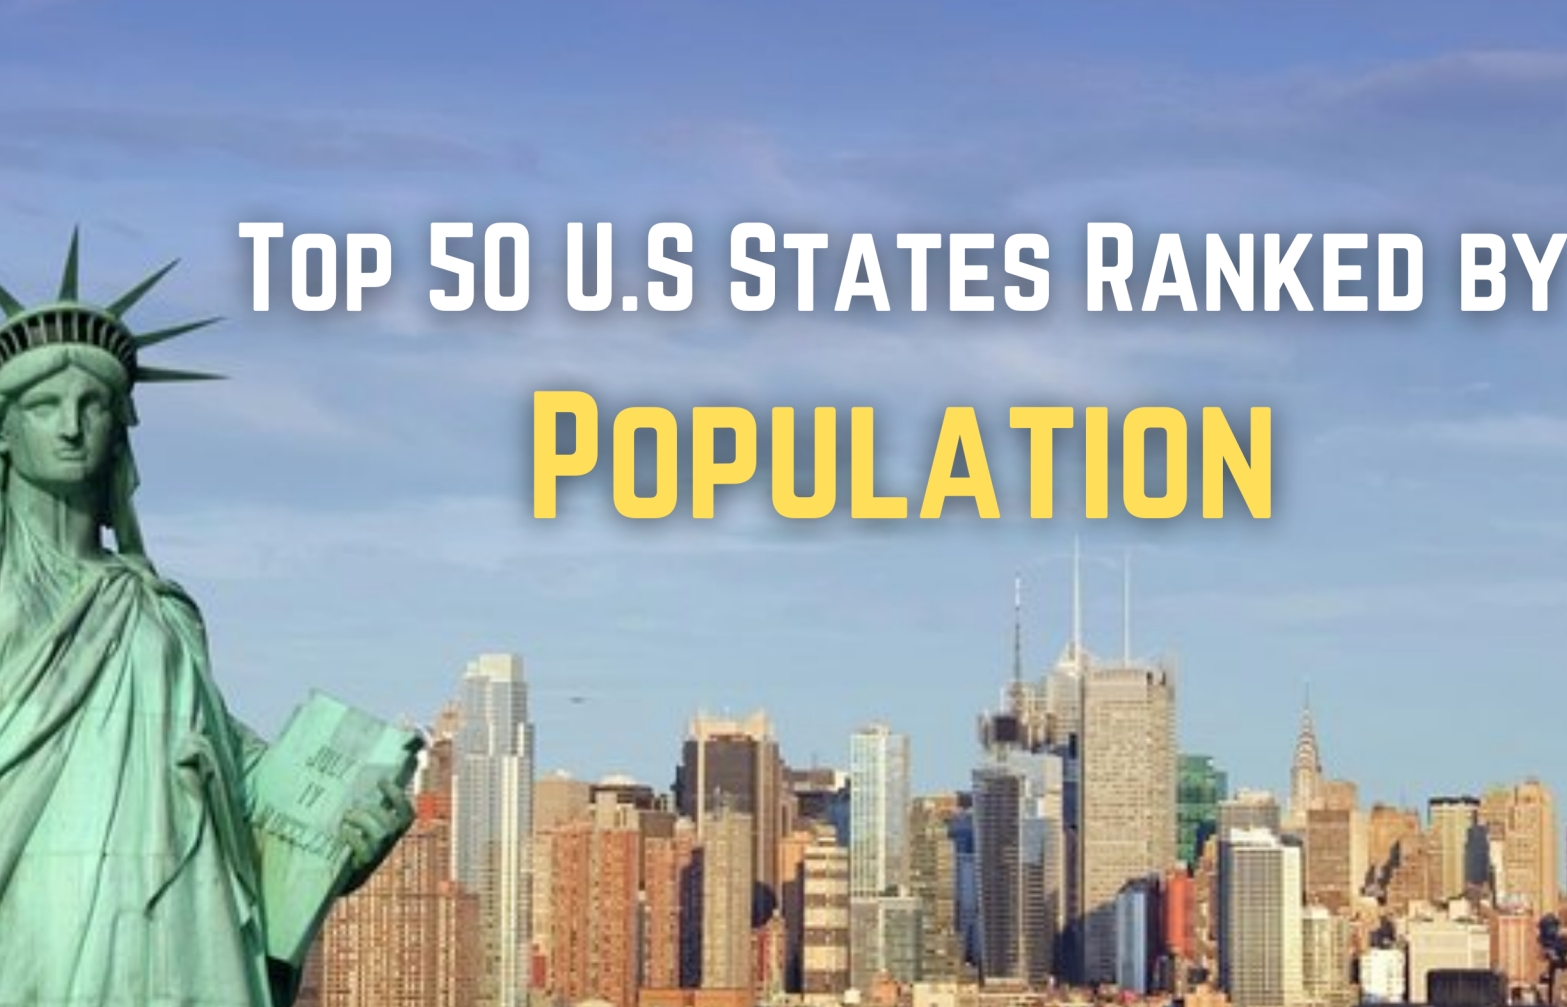 The 50 US States Ranked by Popuplation Today - The Largest and Smallest